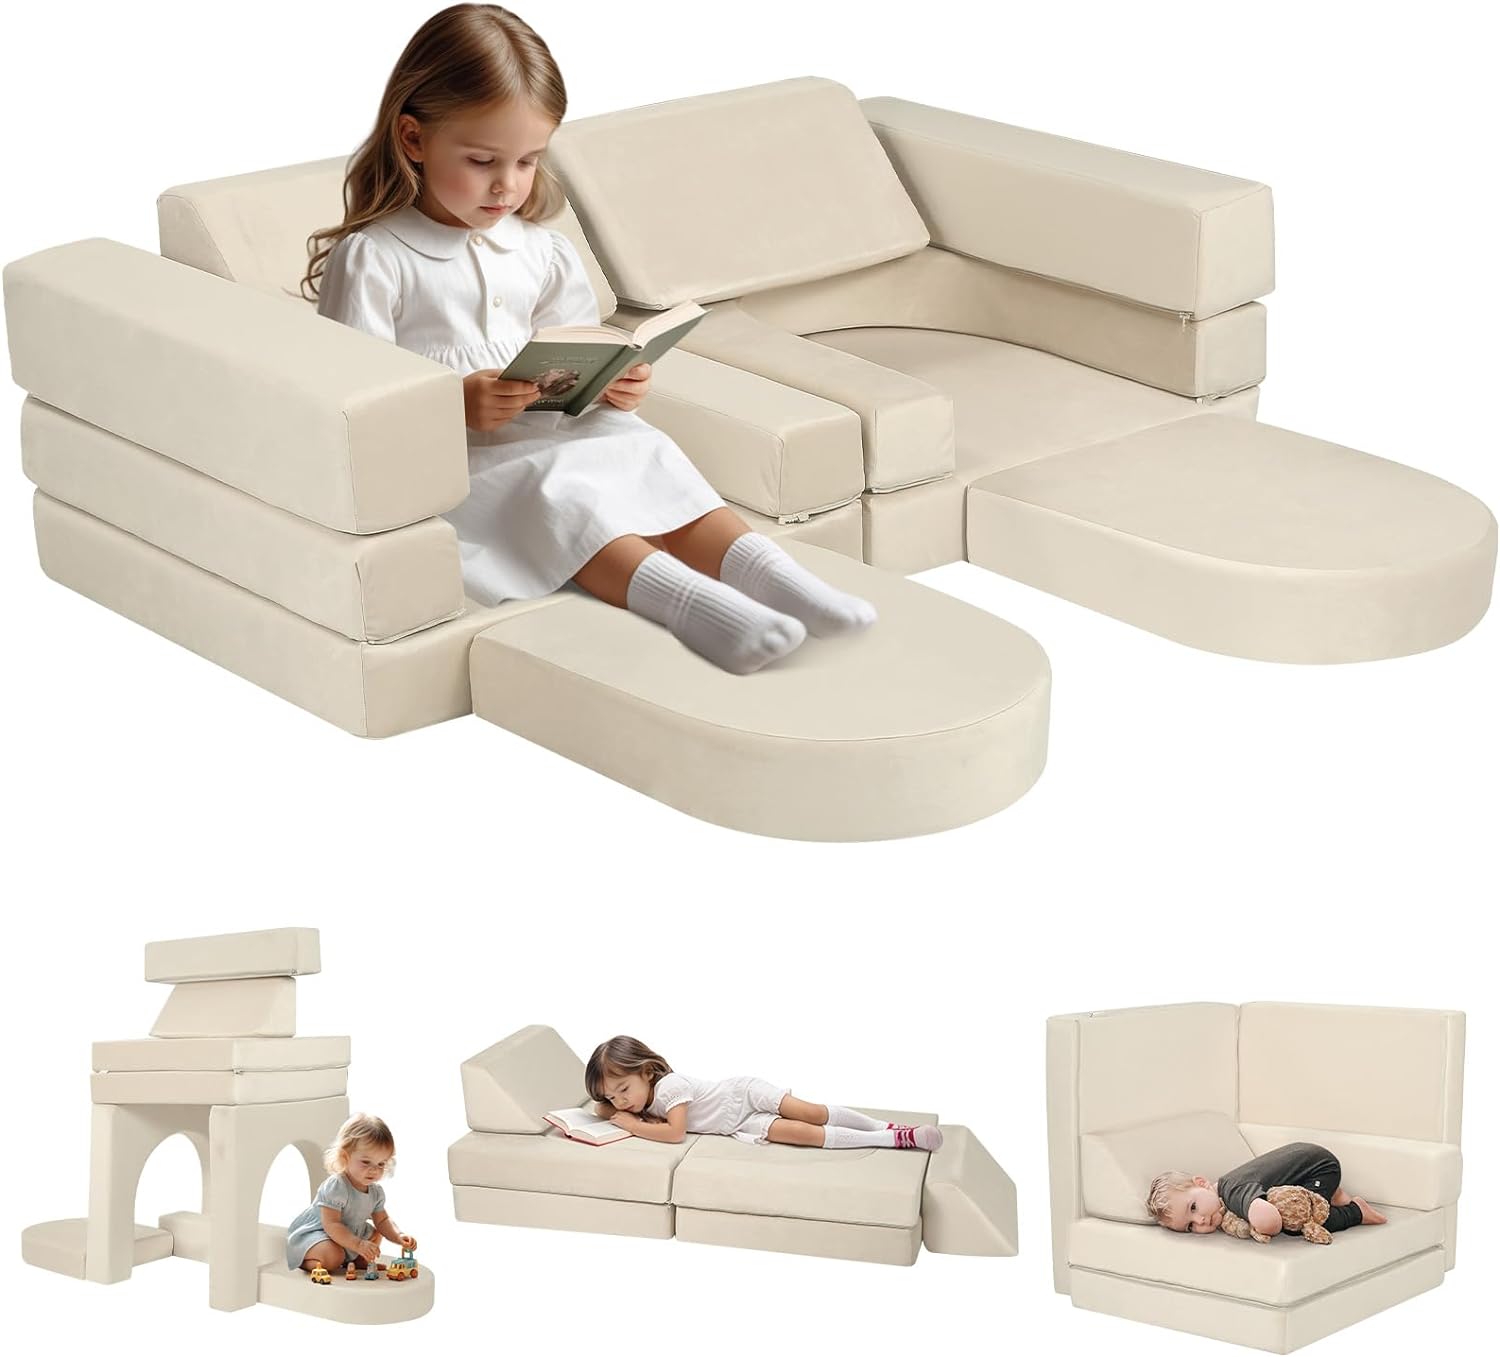 MeMoreCool 10-Piece Couch Sofa, Modular Toddler Glow Sofa for Playroom Bedroom, Fold Out Play Couch for Kid Girl Boy, Sectional Foam Playset Couch Set, Beige